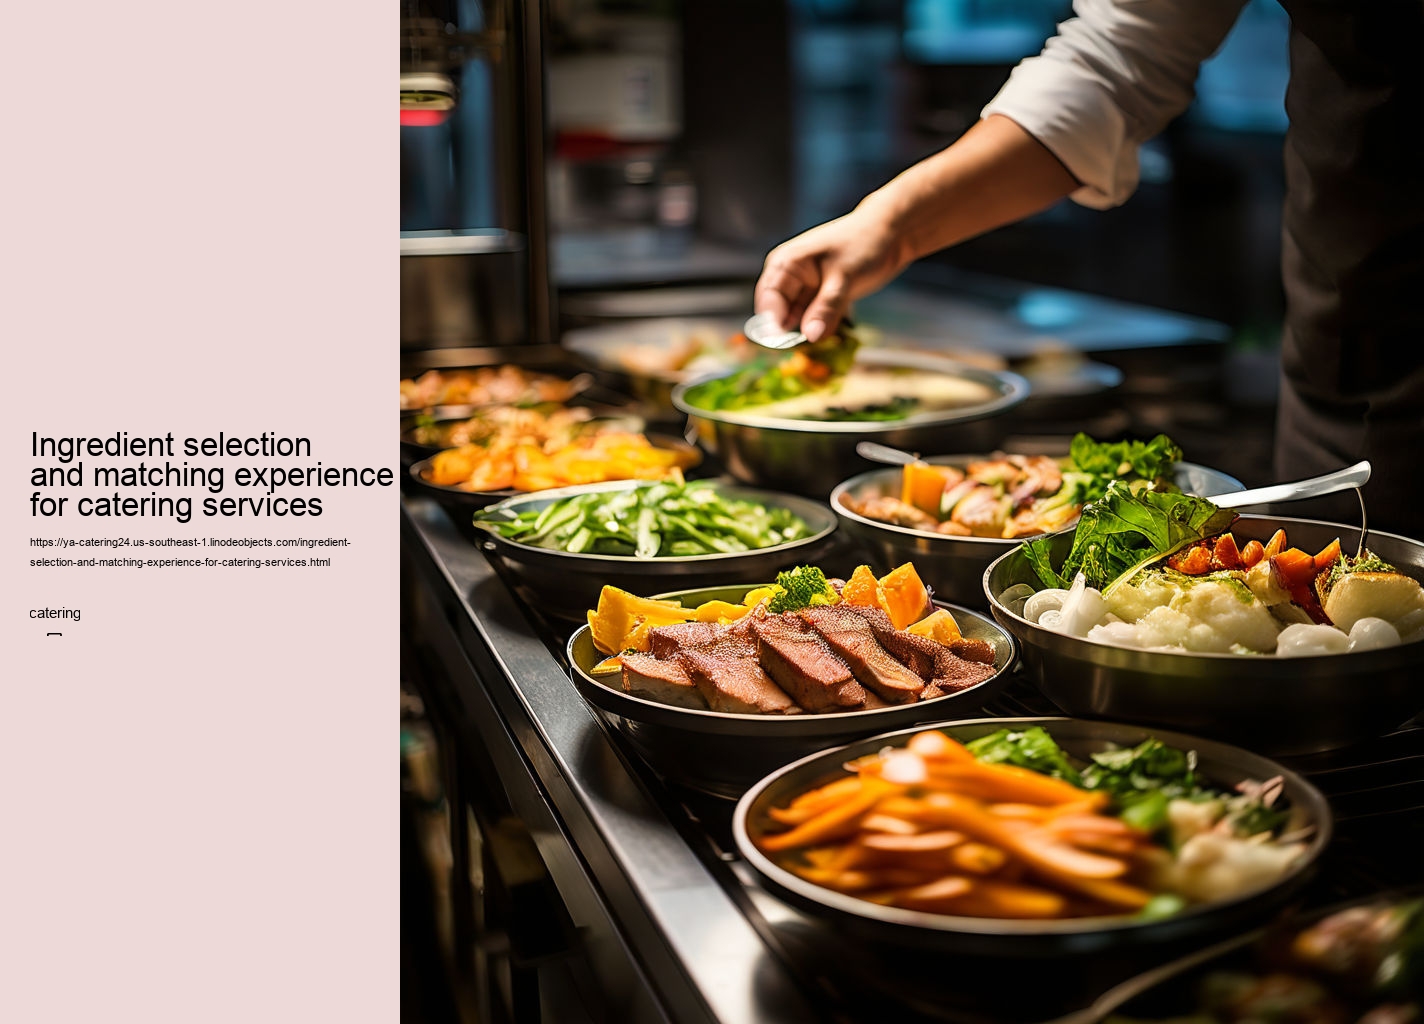 Ingredient selection and matching experience for catering services